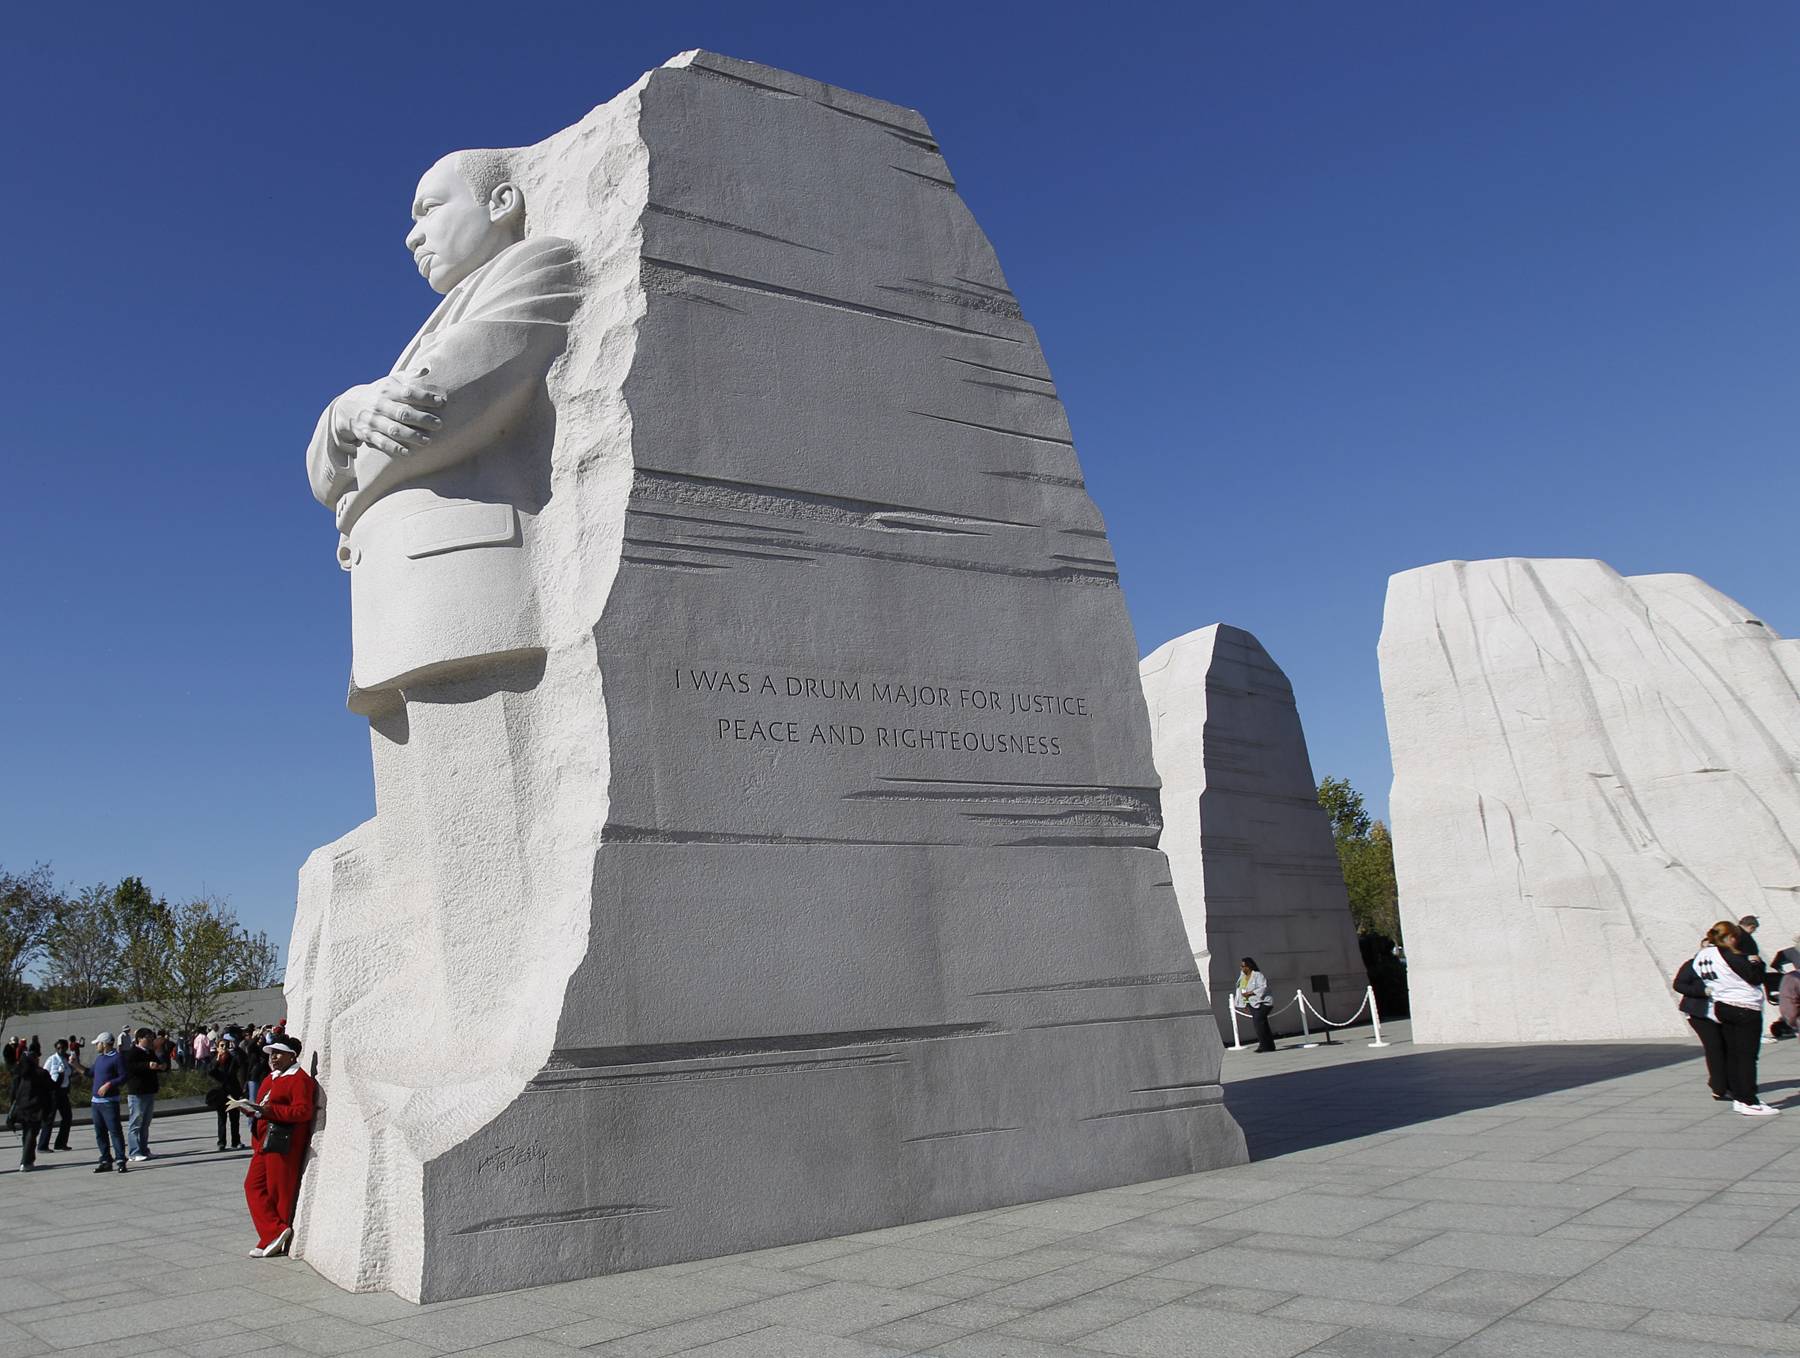 MLK Memorial Will Be Corrected - As announced last week, the incorrect inscription on the Martin Luther King Jr. Memorial on the National Mall will be corrected. Interior Department Secretary Ken Salazar has given the National Park Service a 30-day deadline to correct the quotation.(Photo: AP Photo/Jose Luis Magana)